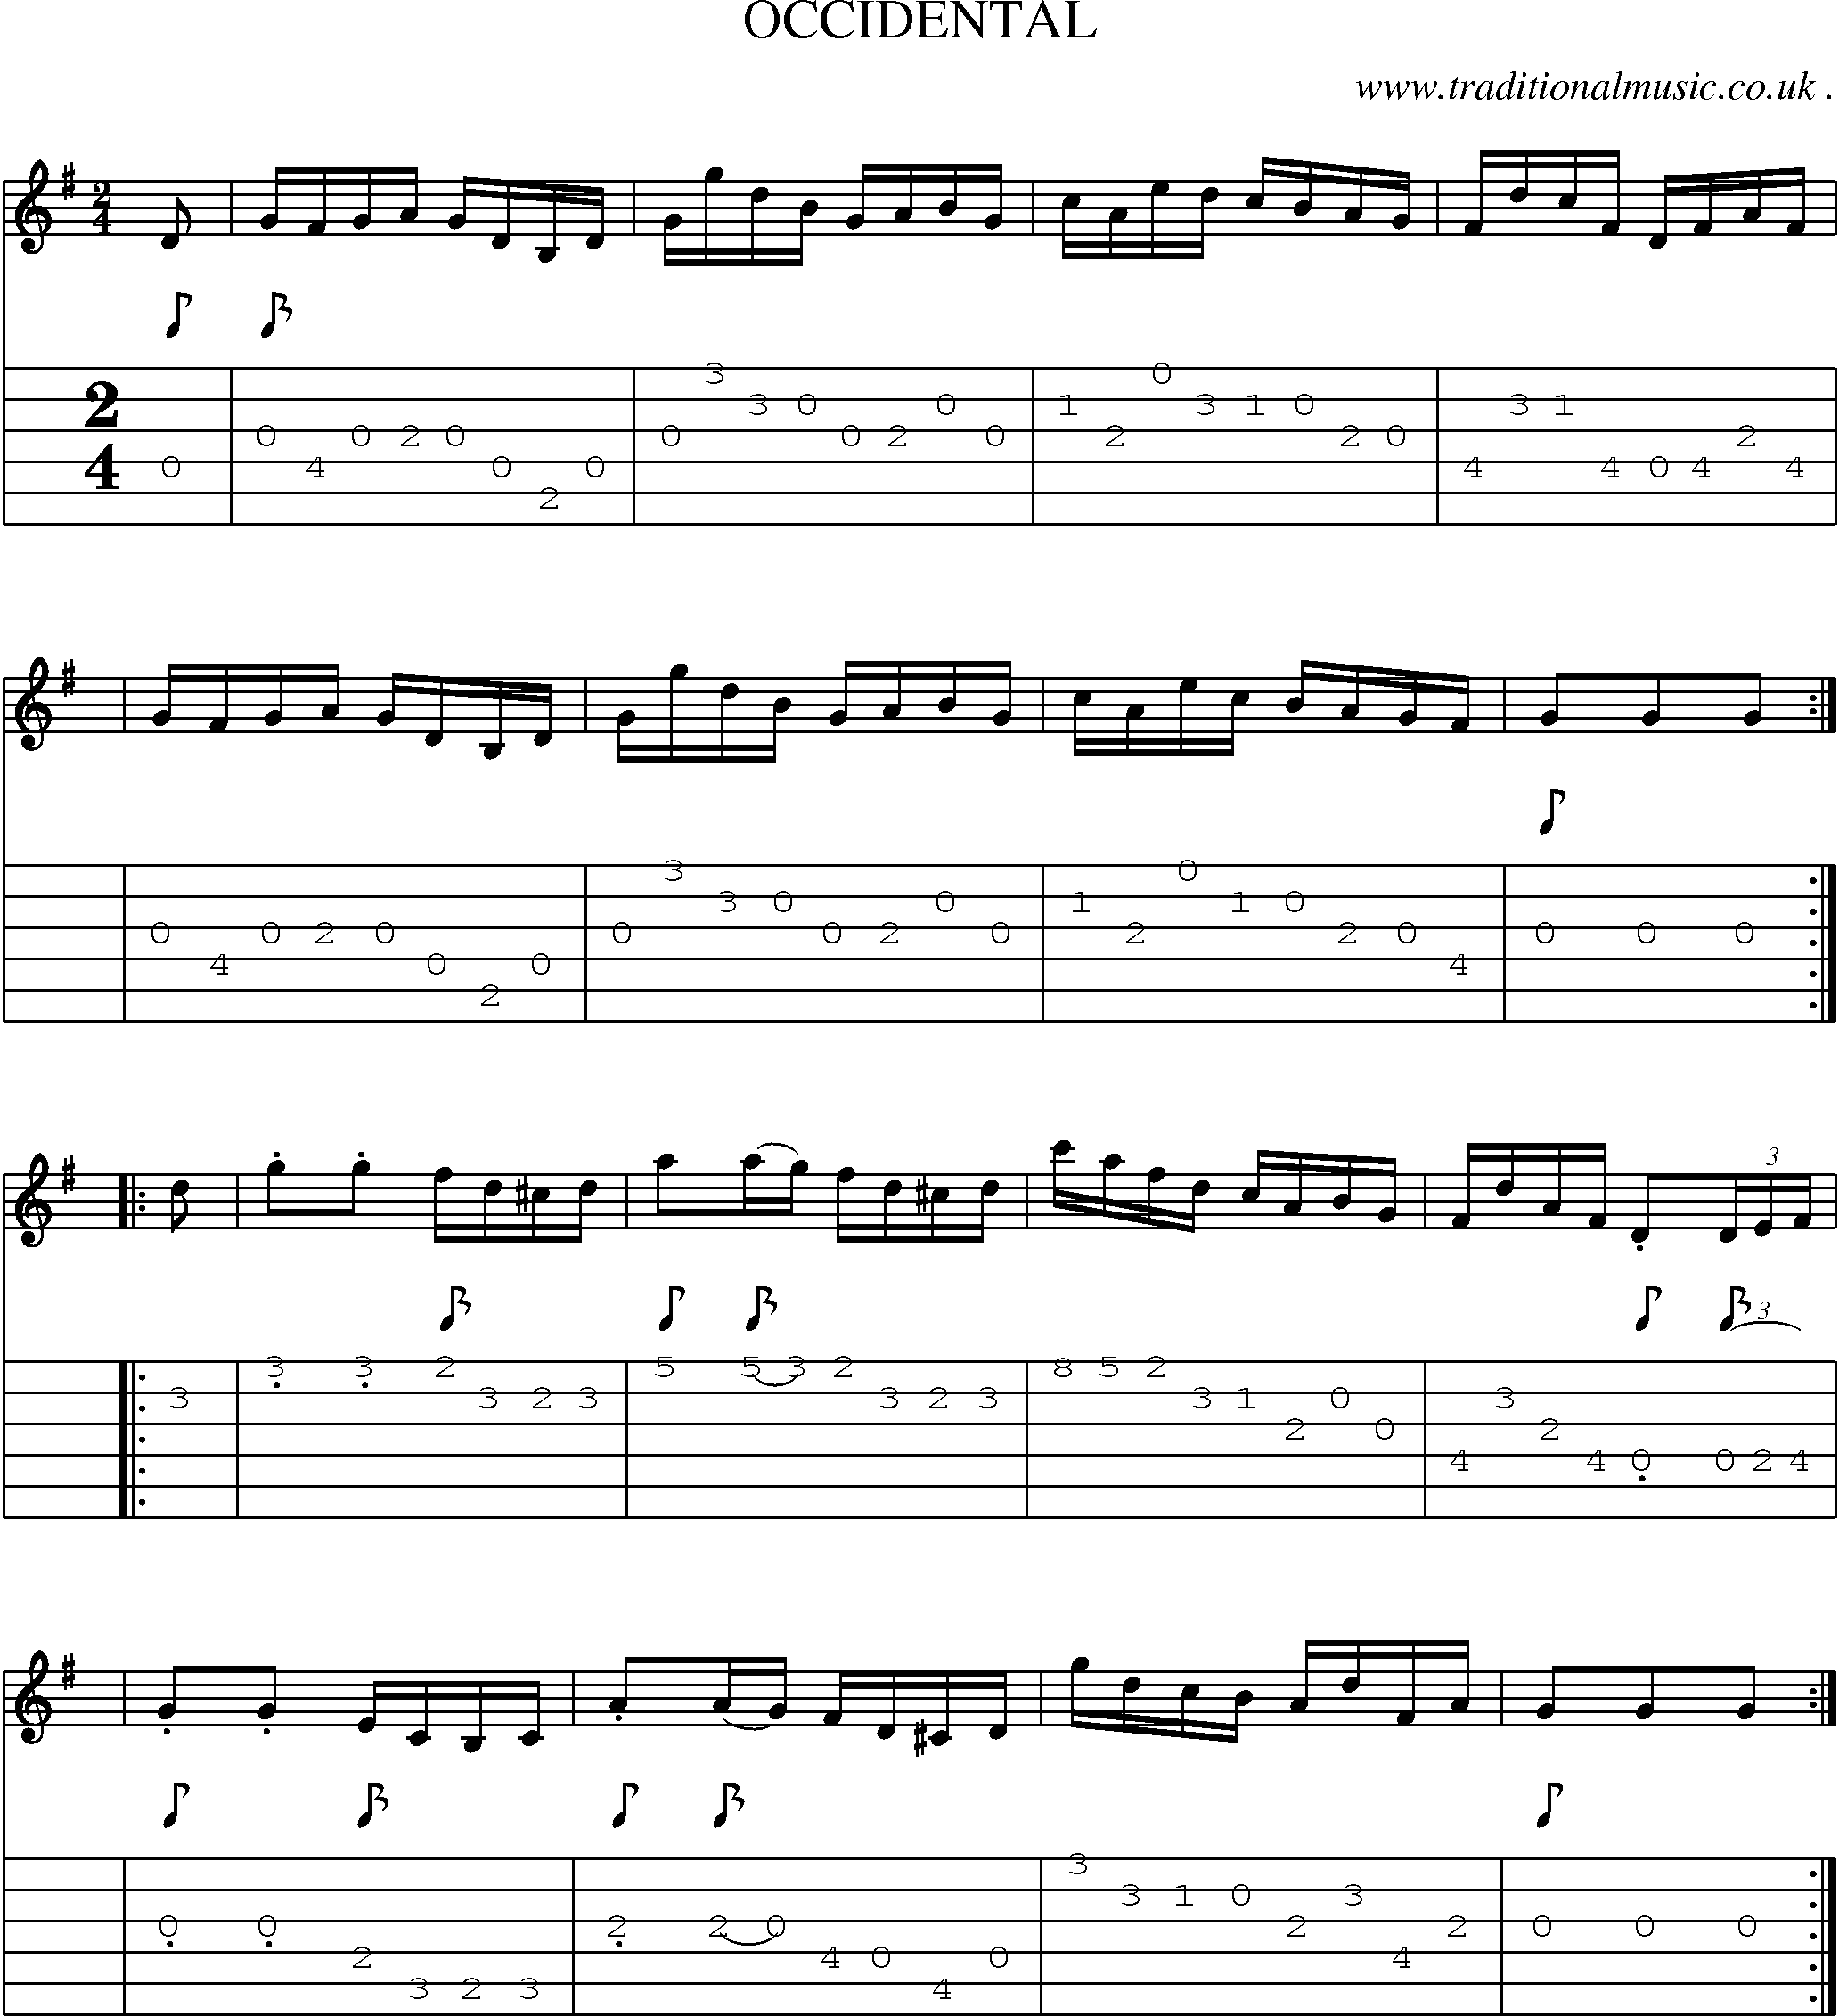 Sheet-Music and Guitar Tabs for Occidental